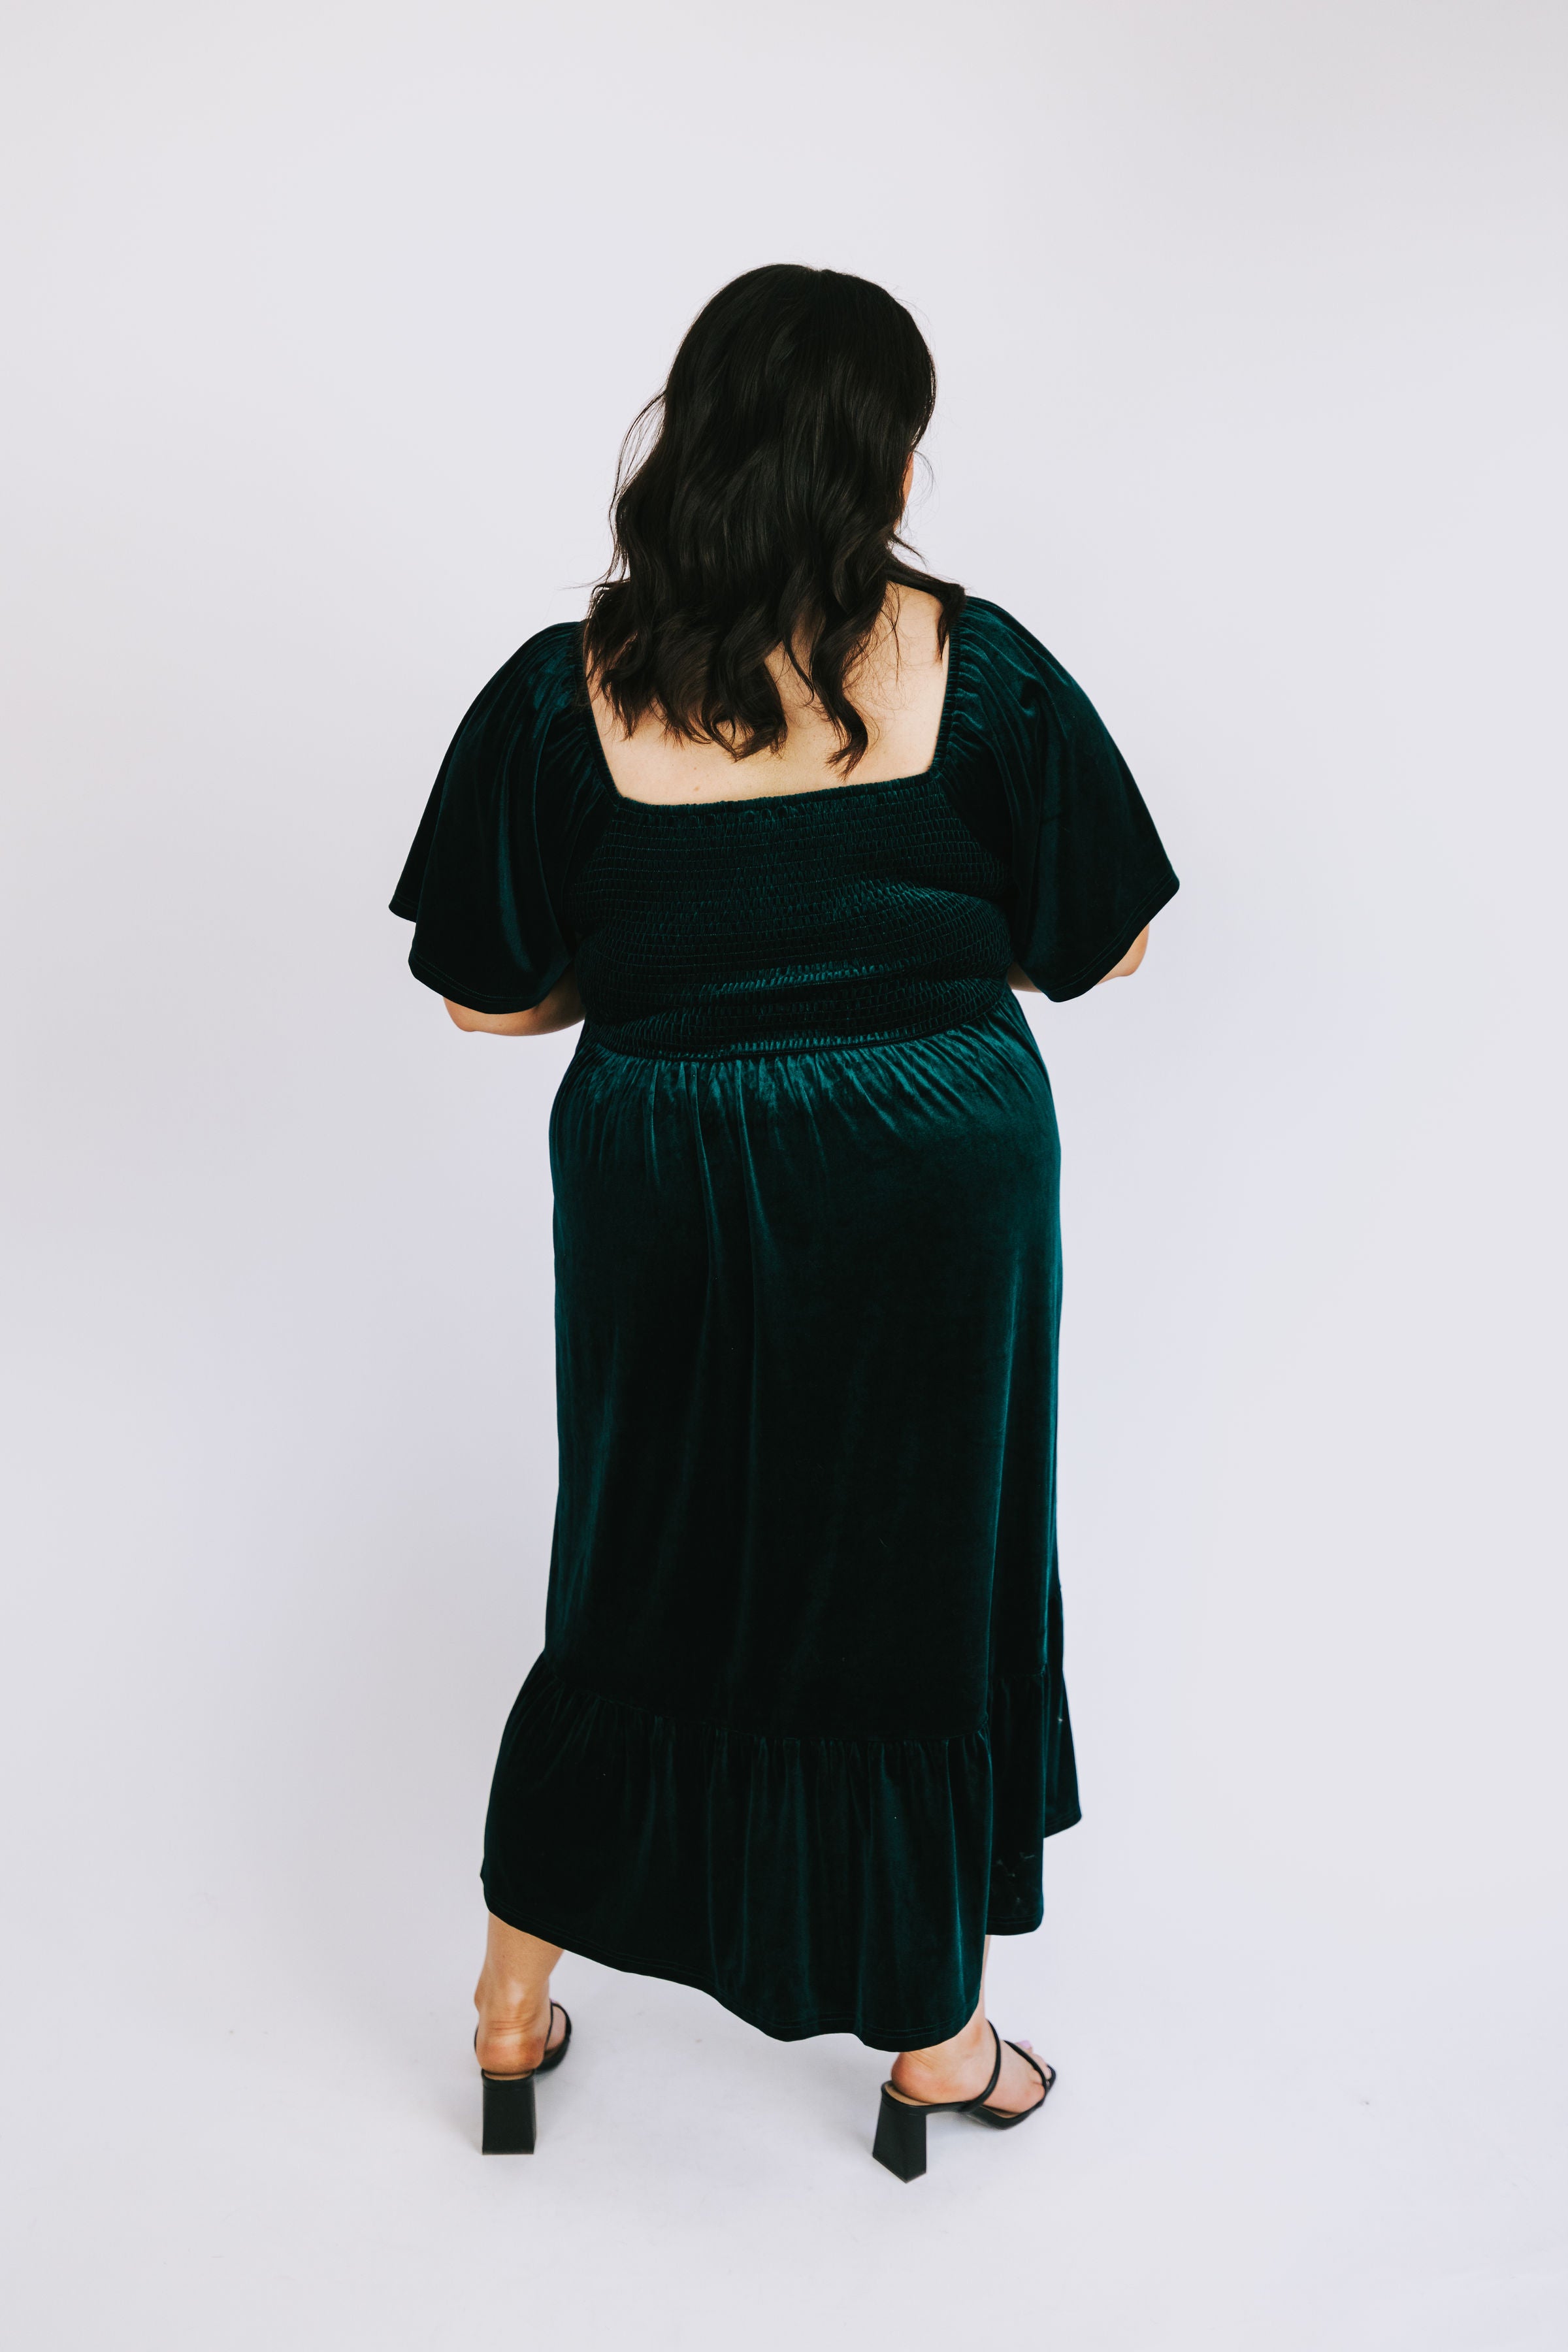 PLUS SIZE - Searching For Dress